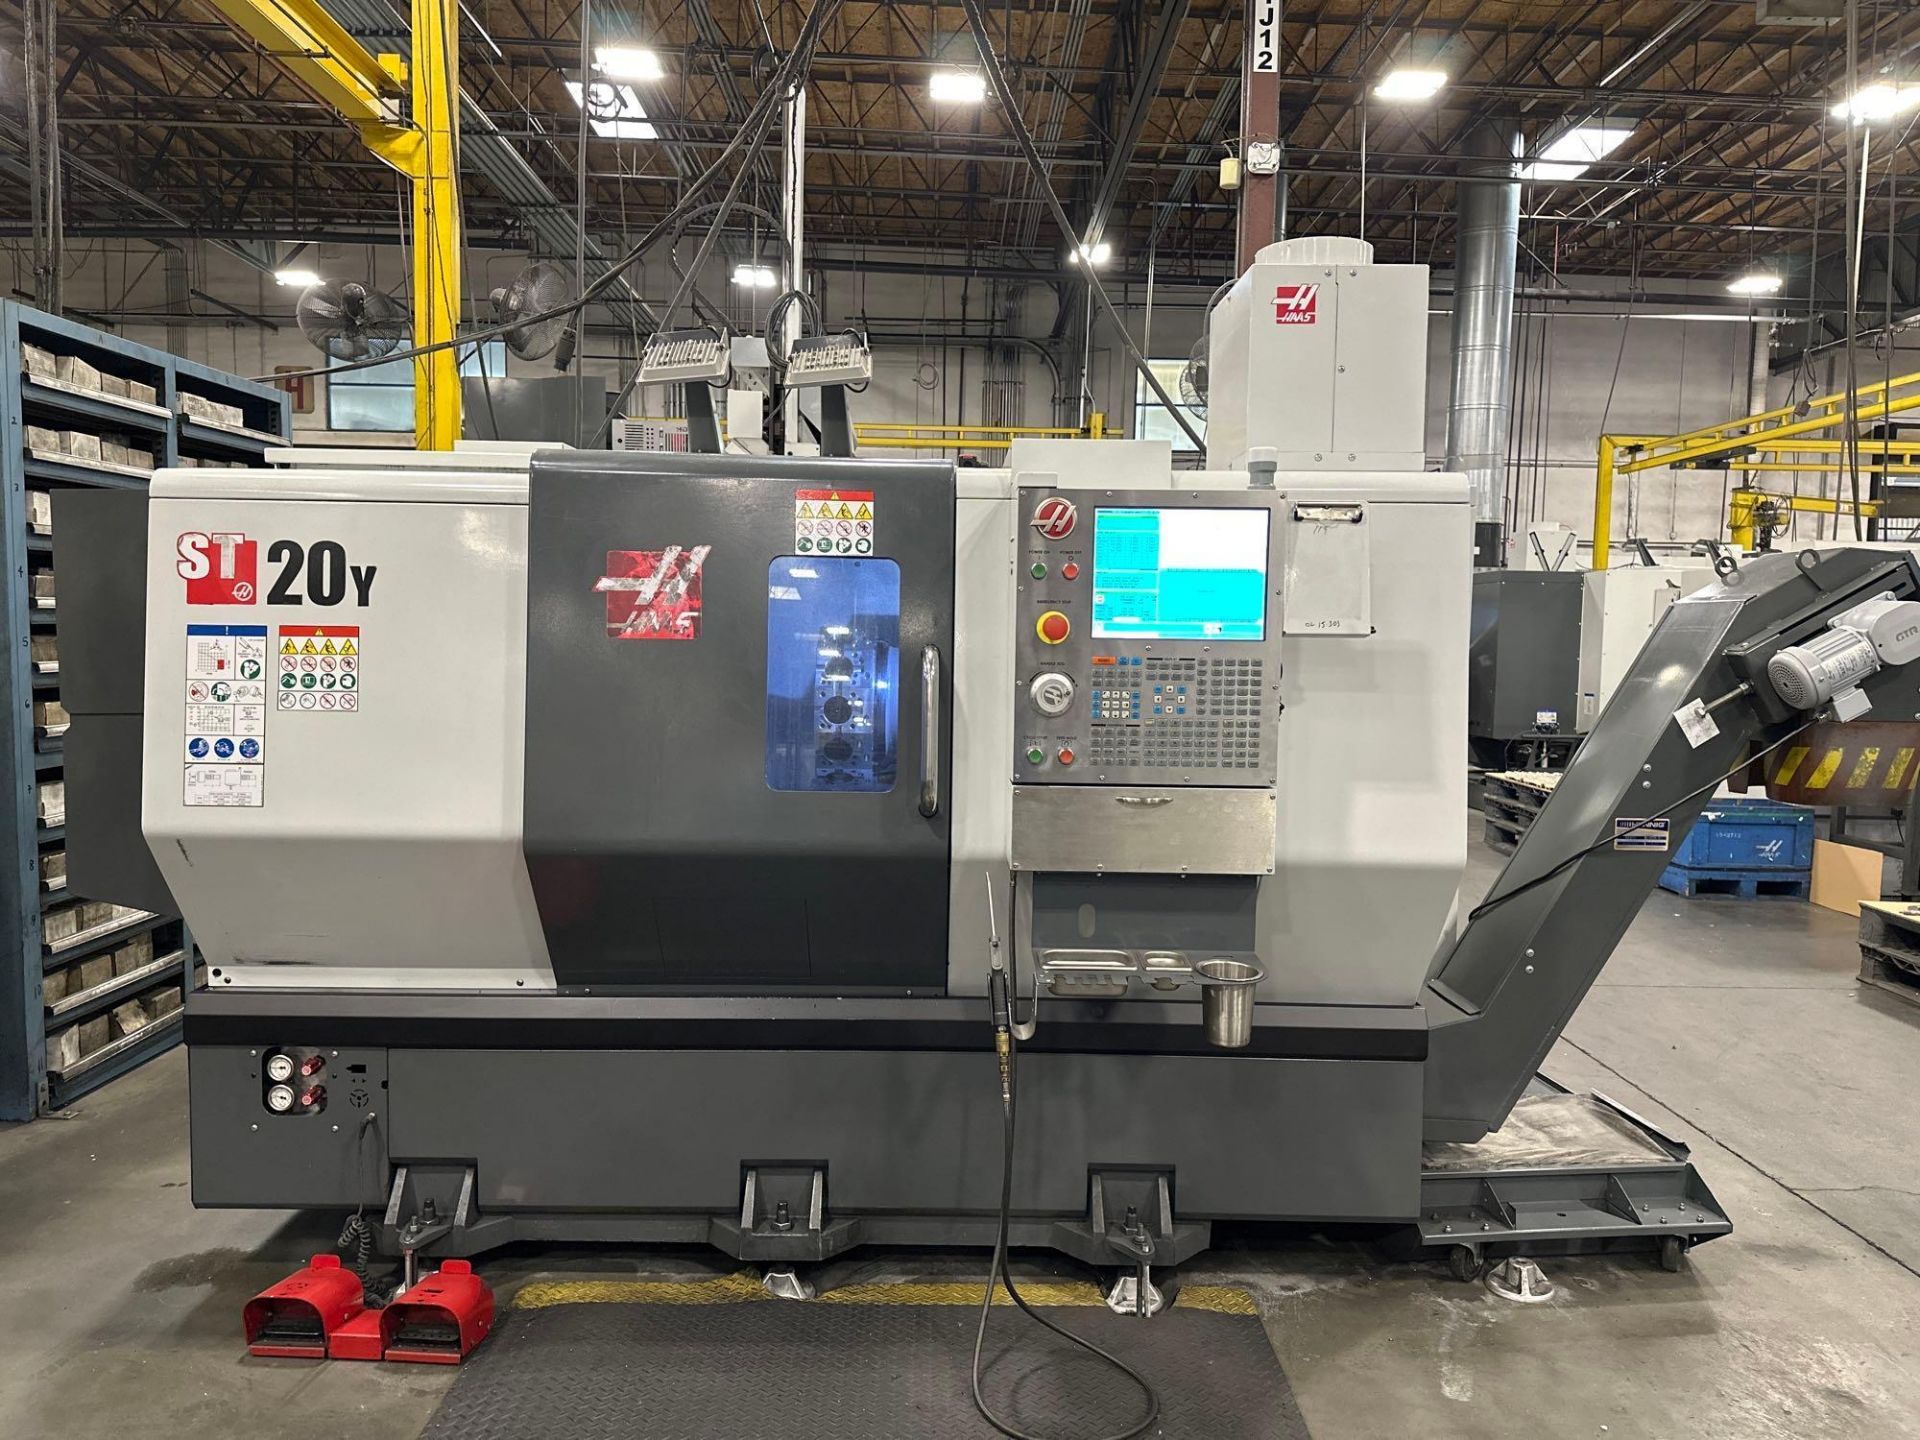 Haas ST-20Y CNC Lathe, VB24, 24 Station Turret. 4000RPM, 20HP, s/n 3106156, 2017 - Image 2 of 11